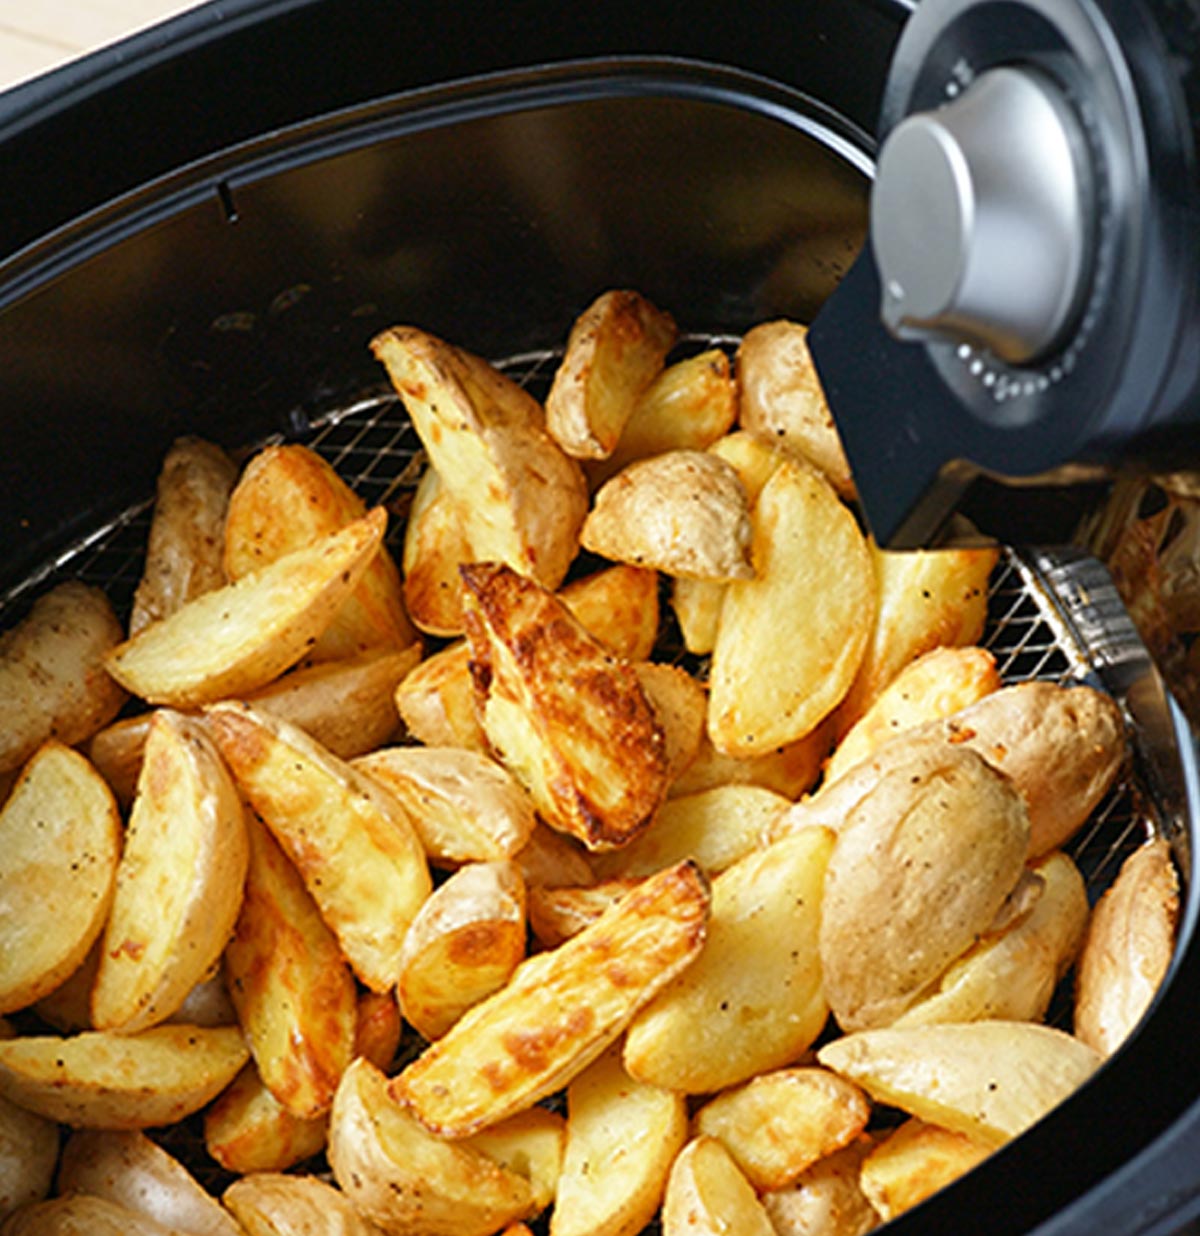 potato wedges in a frying basket